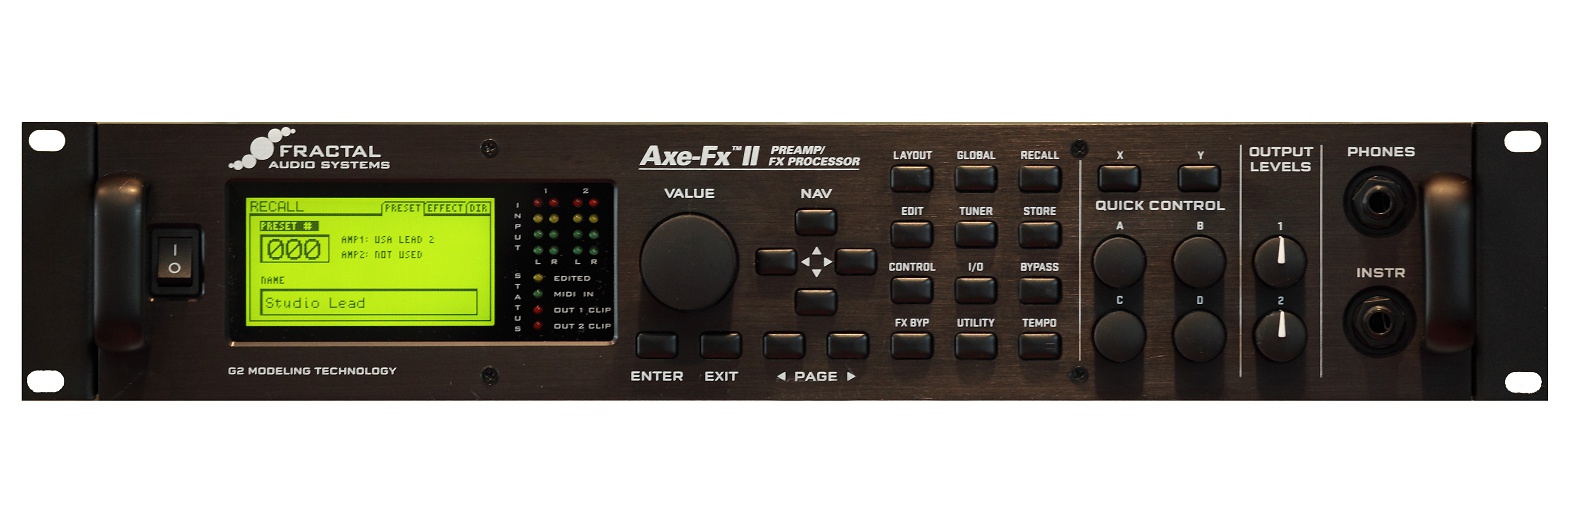 Fractal Audio Systems Axe-Fx IIギター - ギター